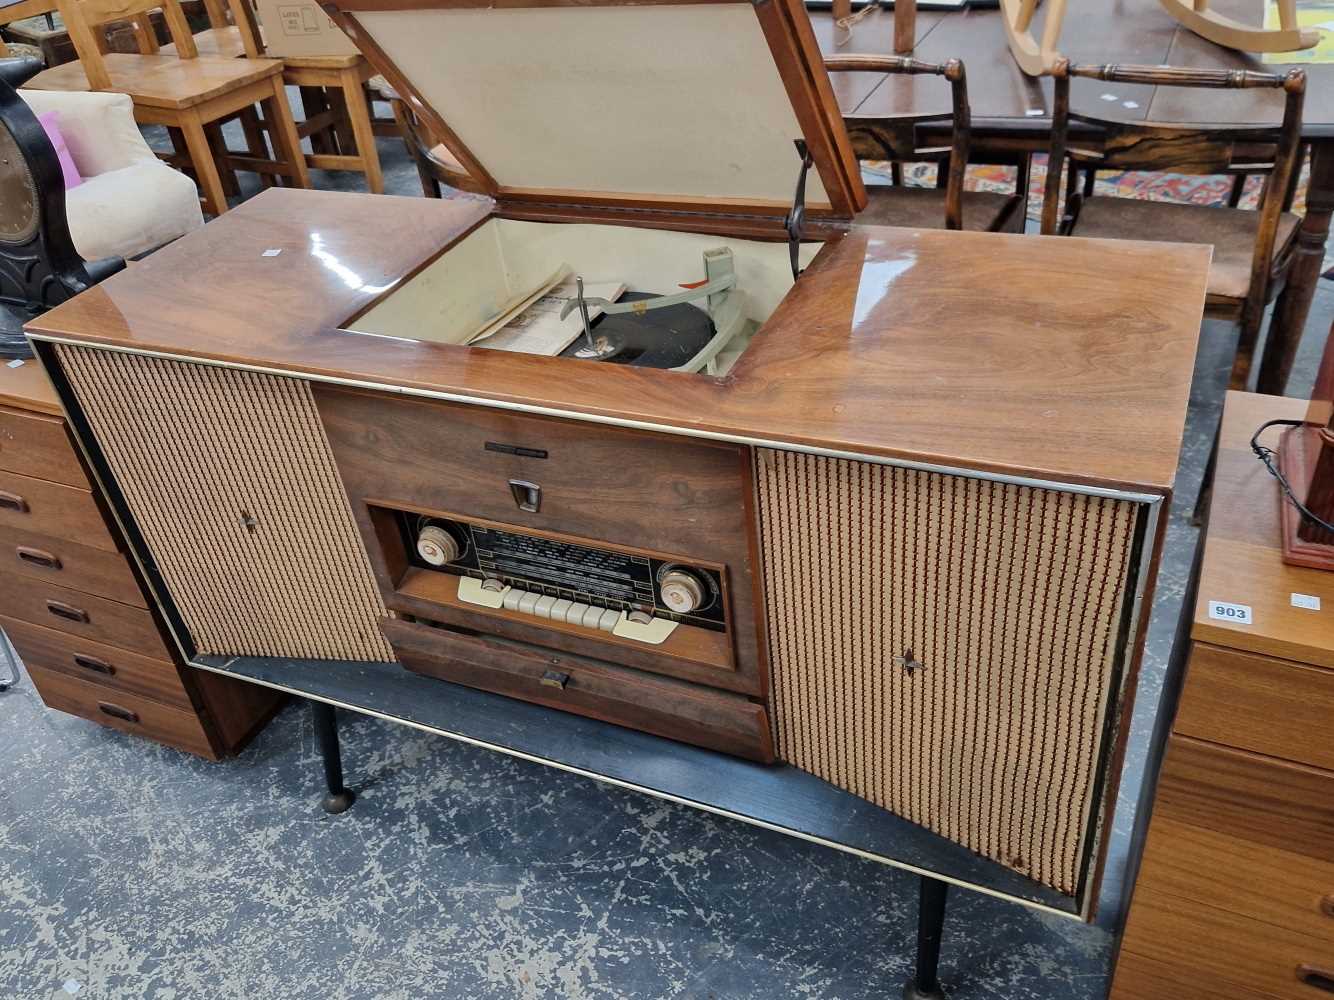 A retro arm chair together with a 1960's radio gram.